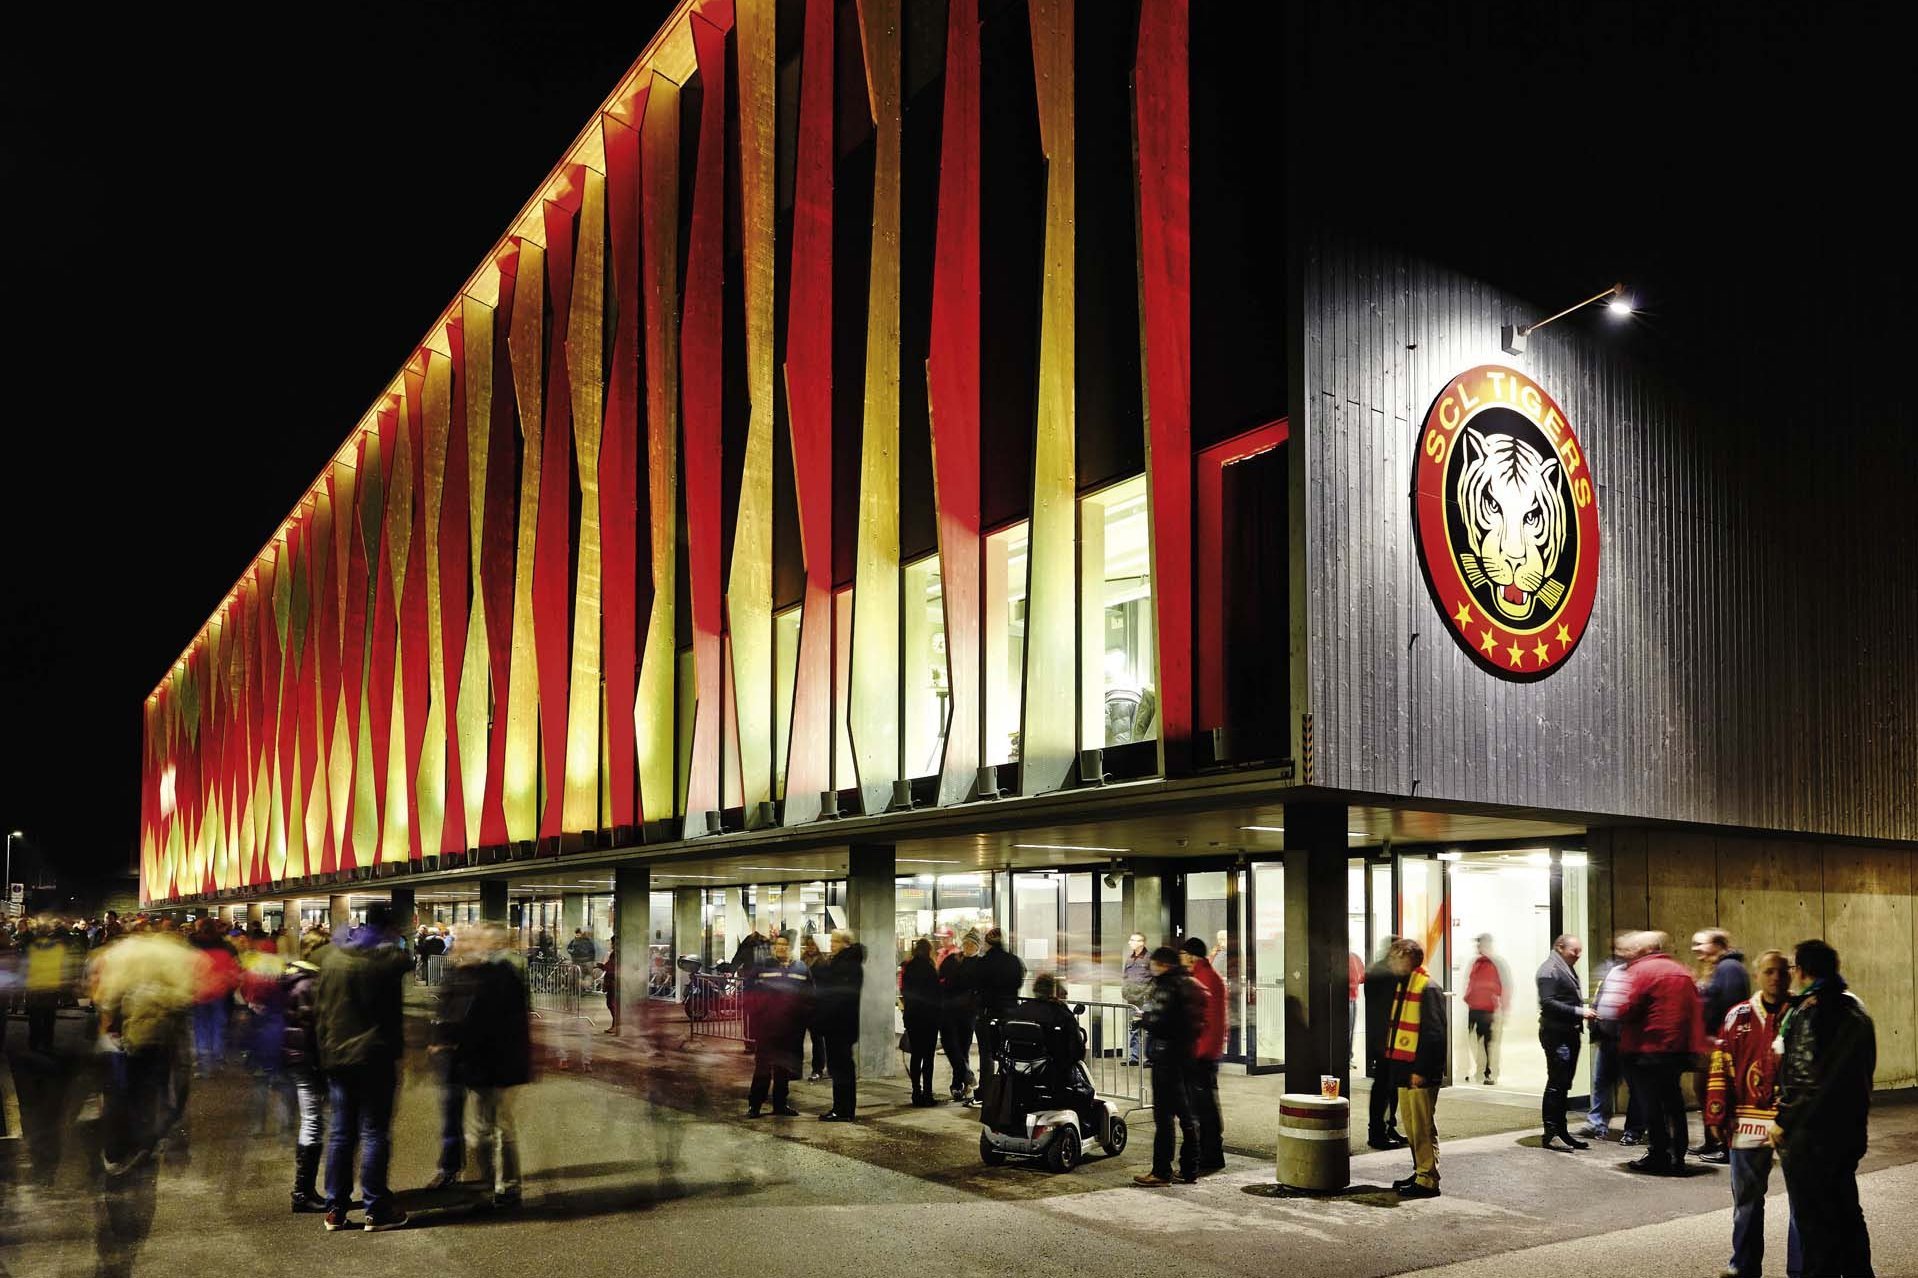 The reconstructed Ilfis Hall at night before a SCL Tigers ice hockey match